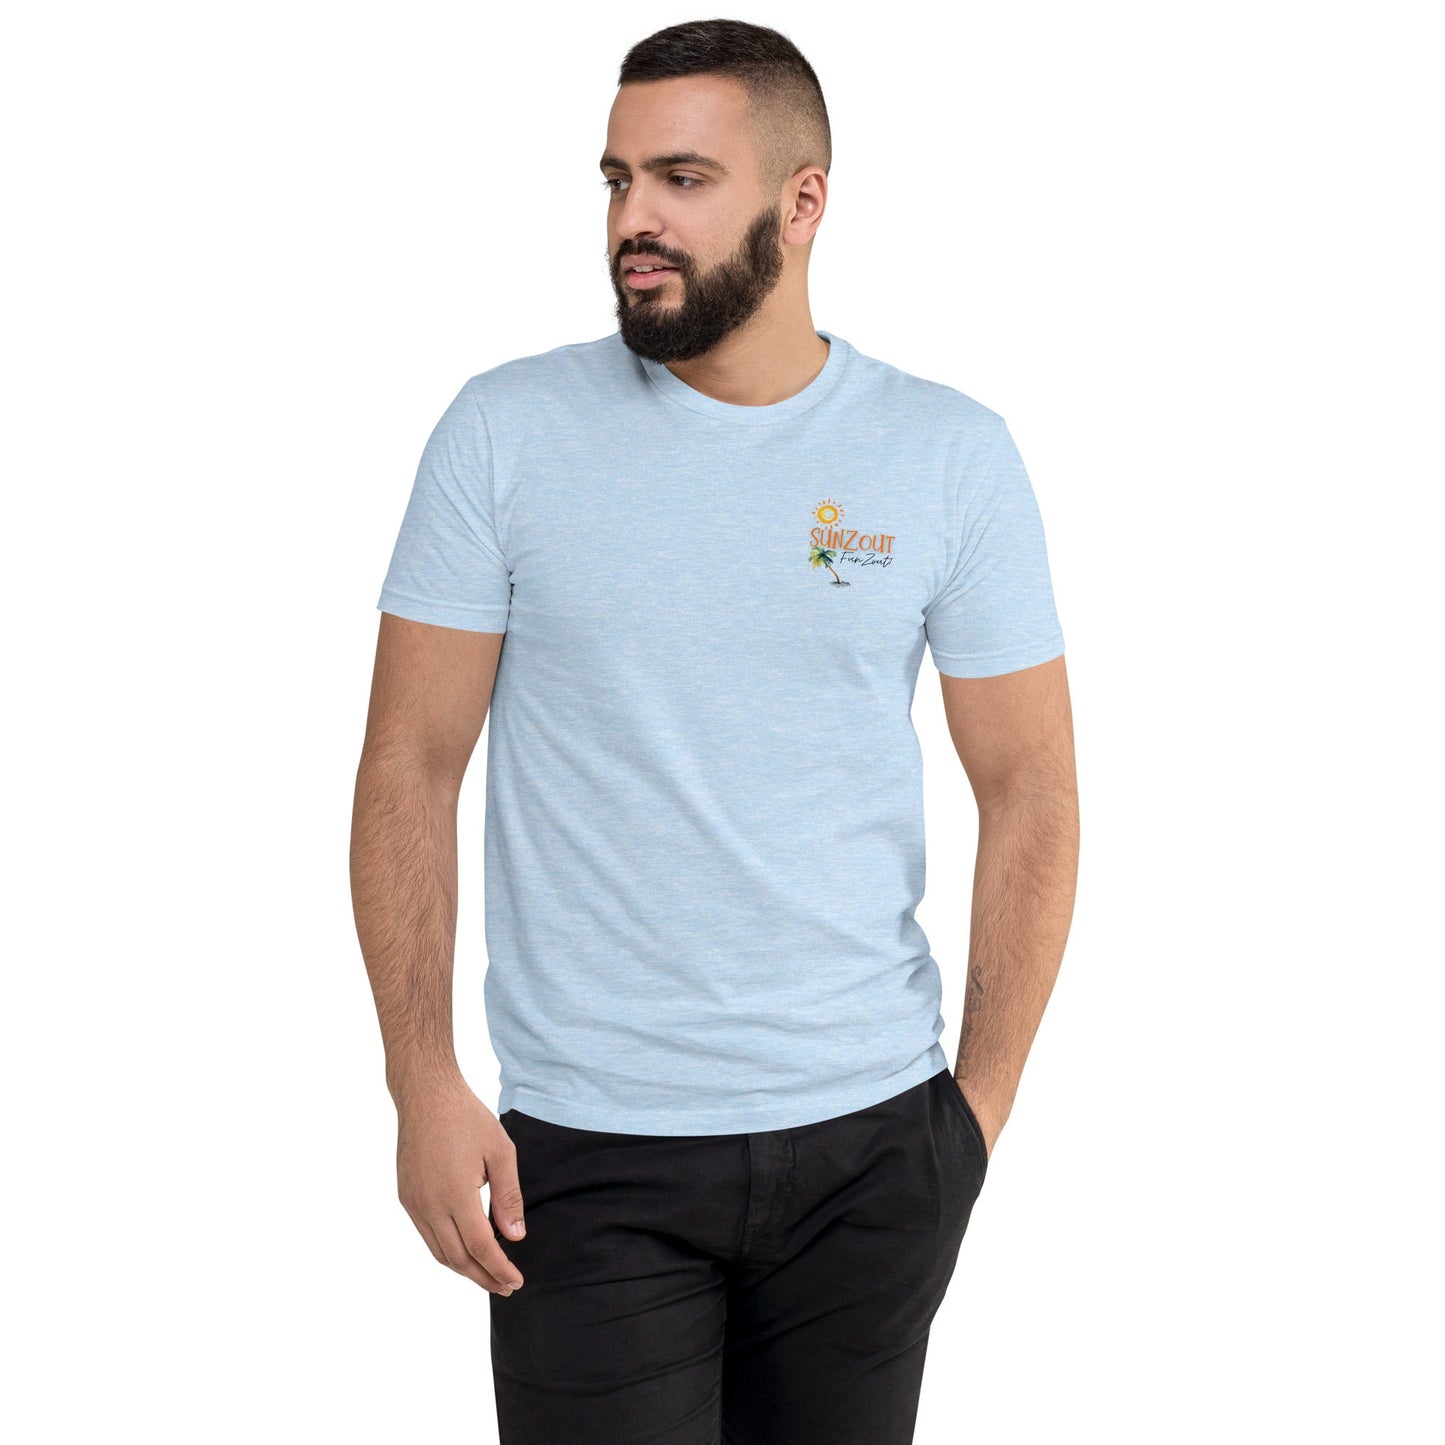 Sunzout Funzout Fitted Short Sleeve T-shirt - Sunzout Outdoor Spaces LLC